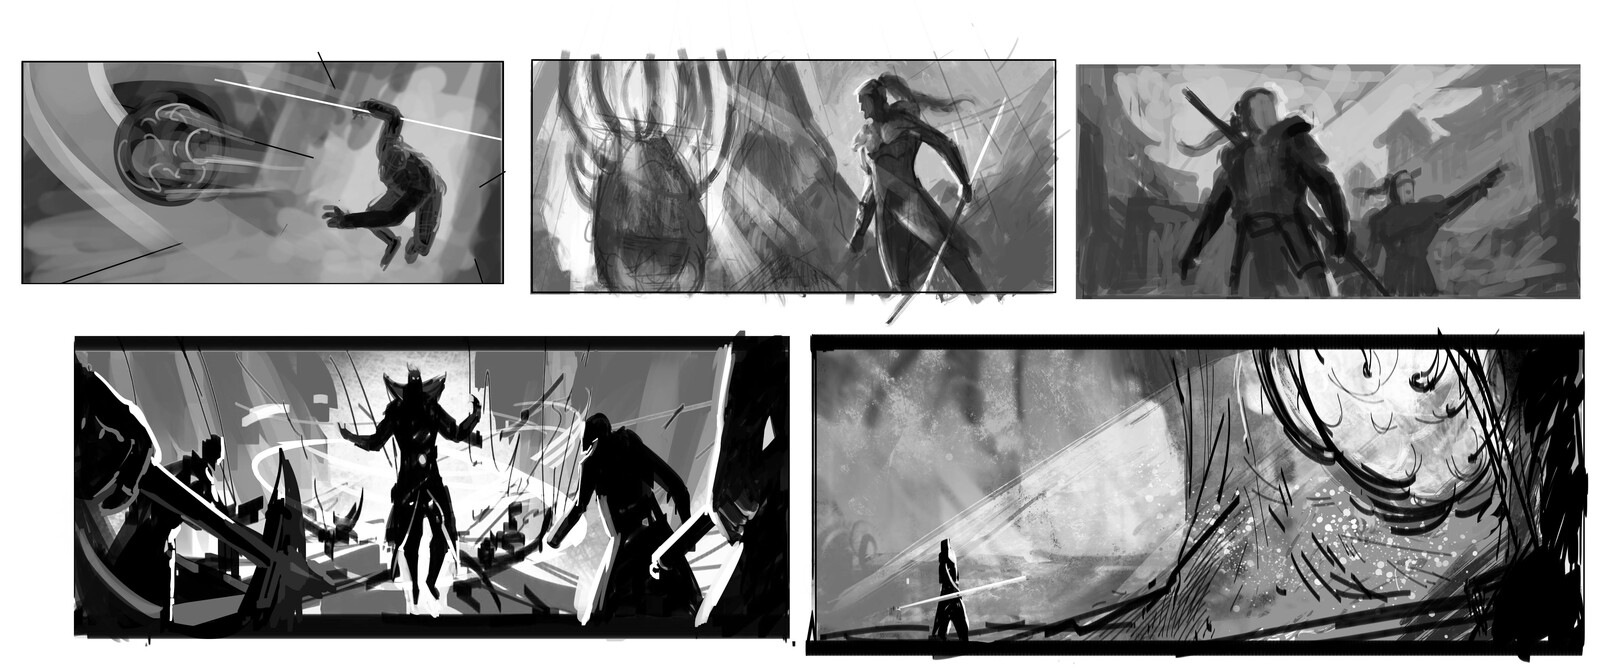 First Thumbnails